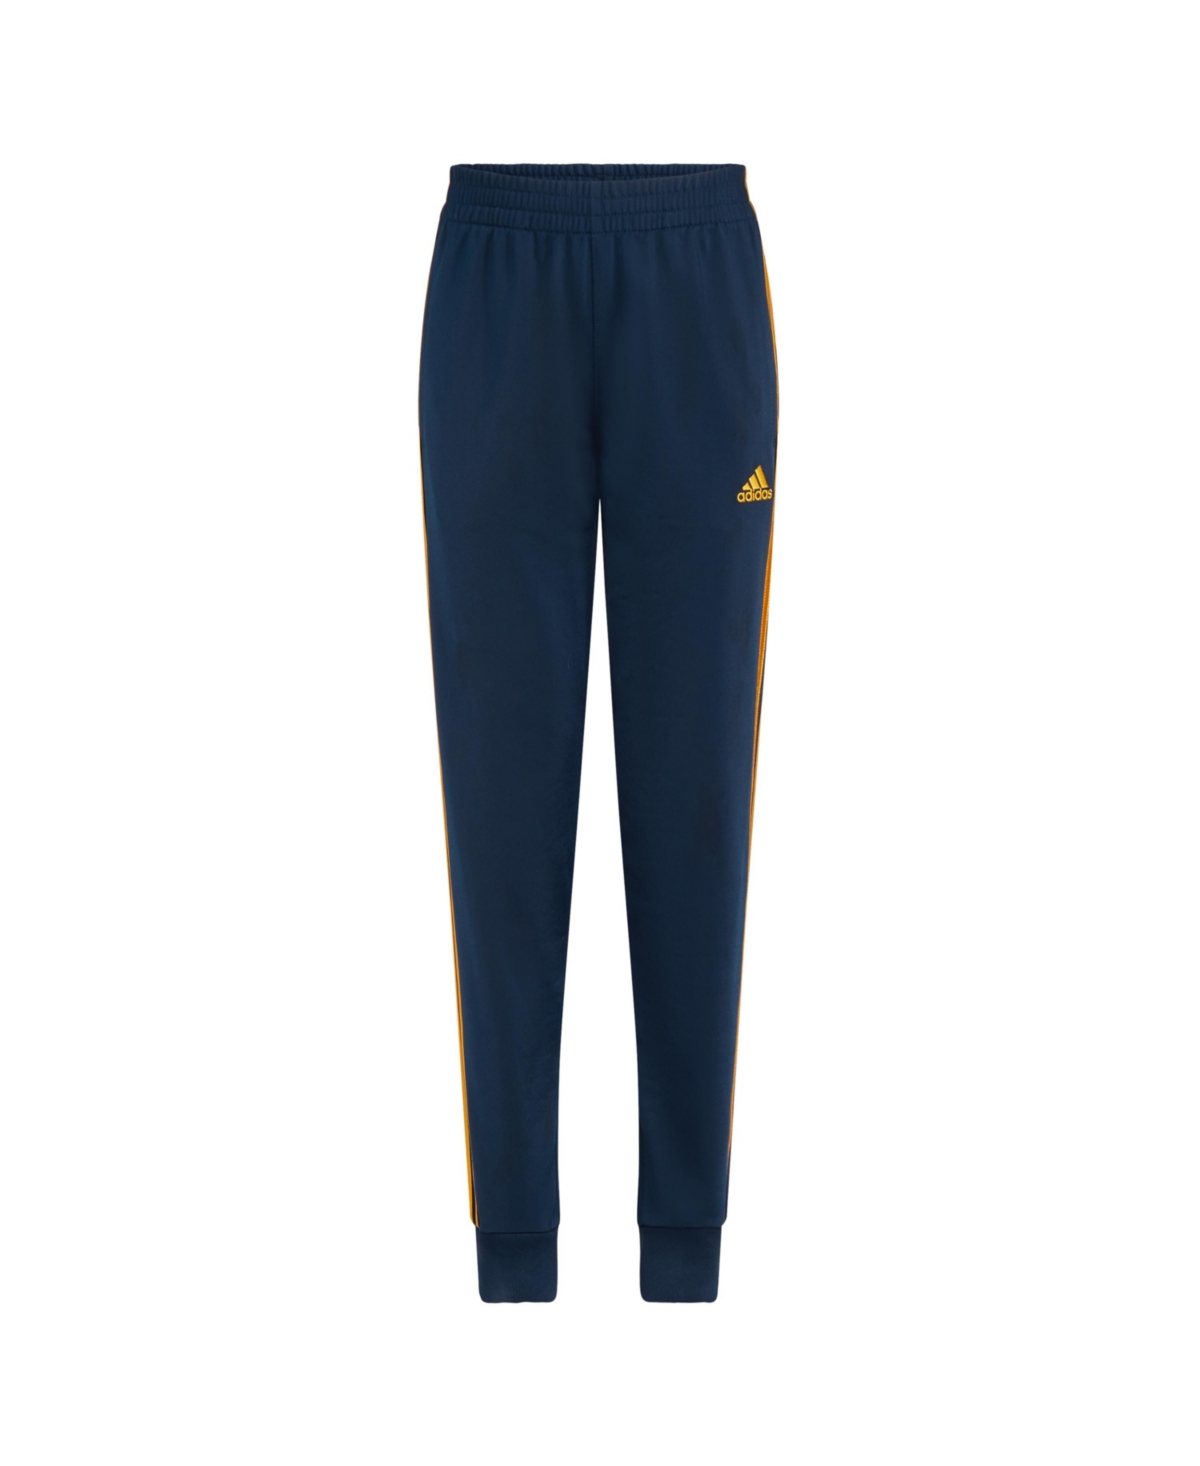 Adidas Originals Kids' Big Boys Elastic Waistband Classic 3-stripe Tricot Joggers In Collegiate Navy With Active Gold